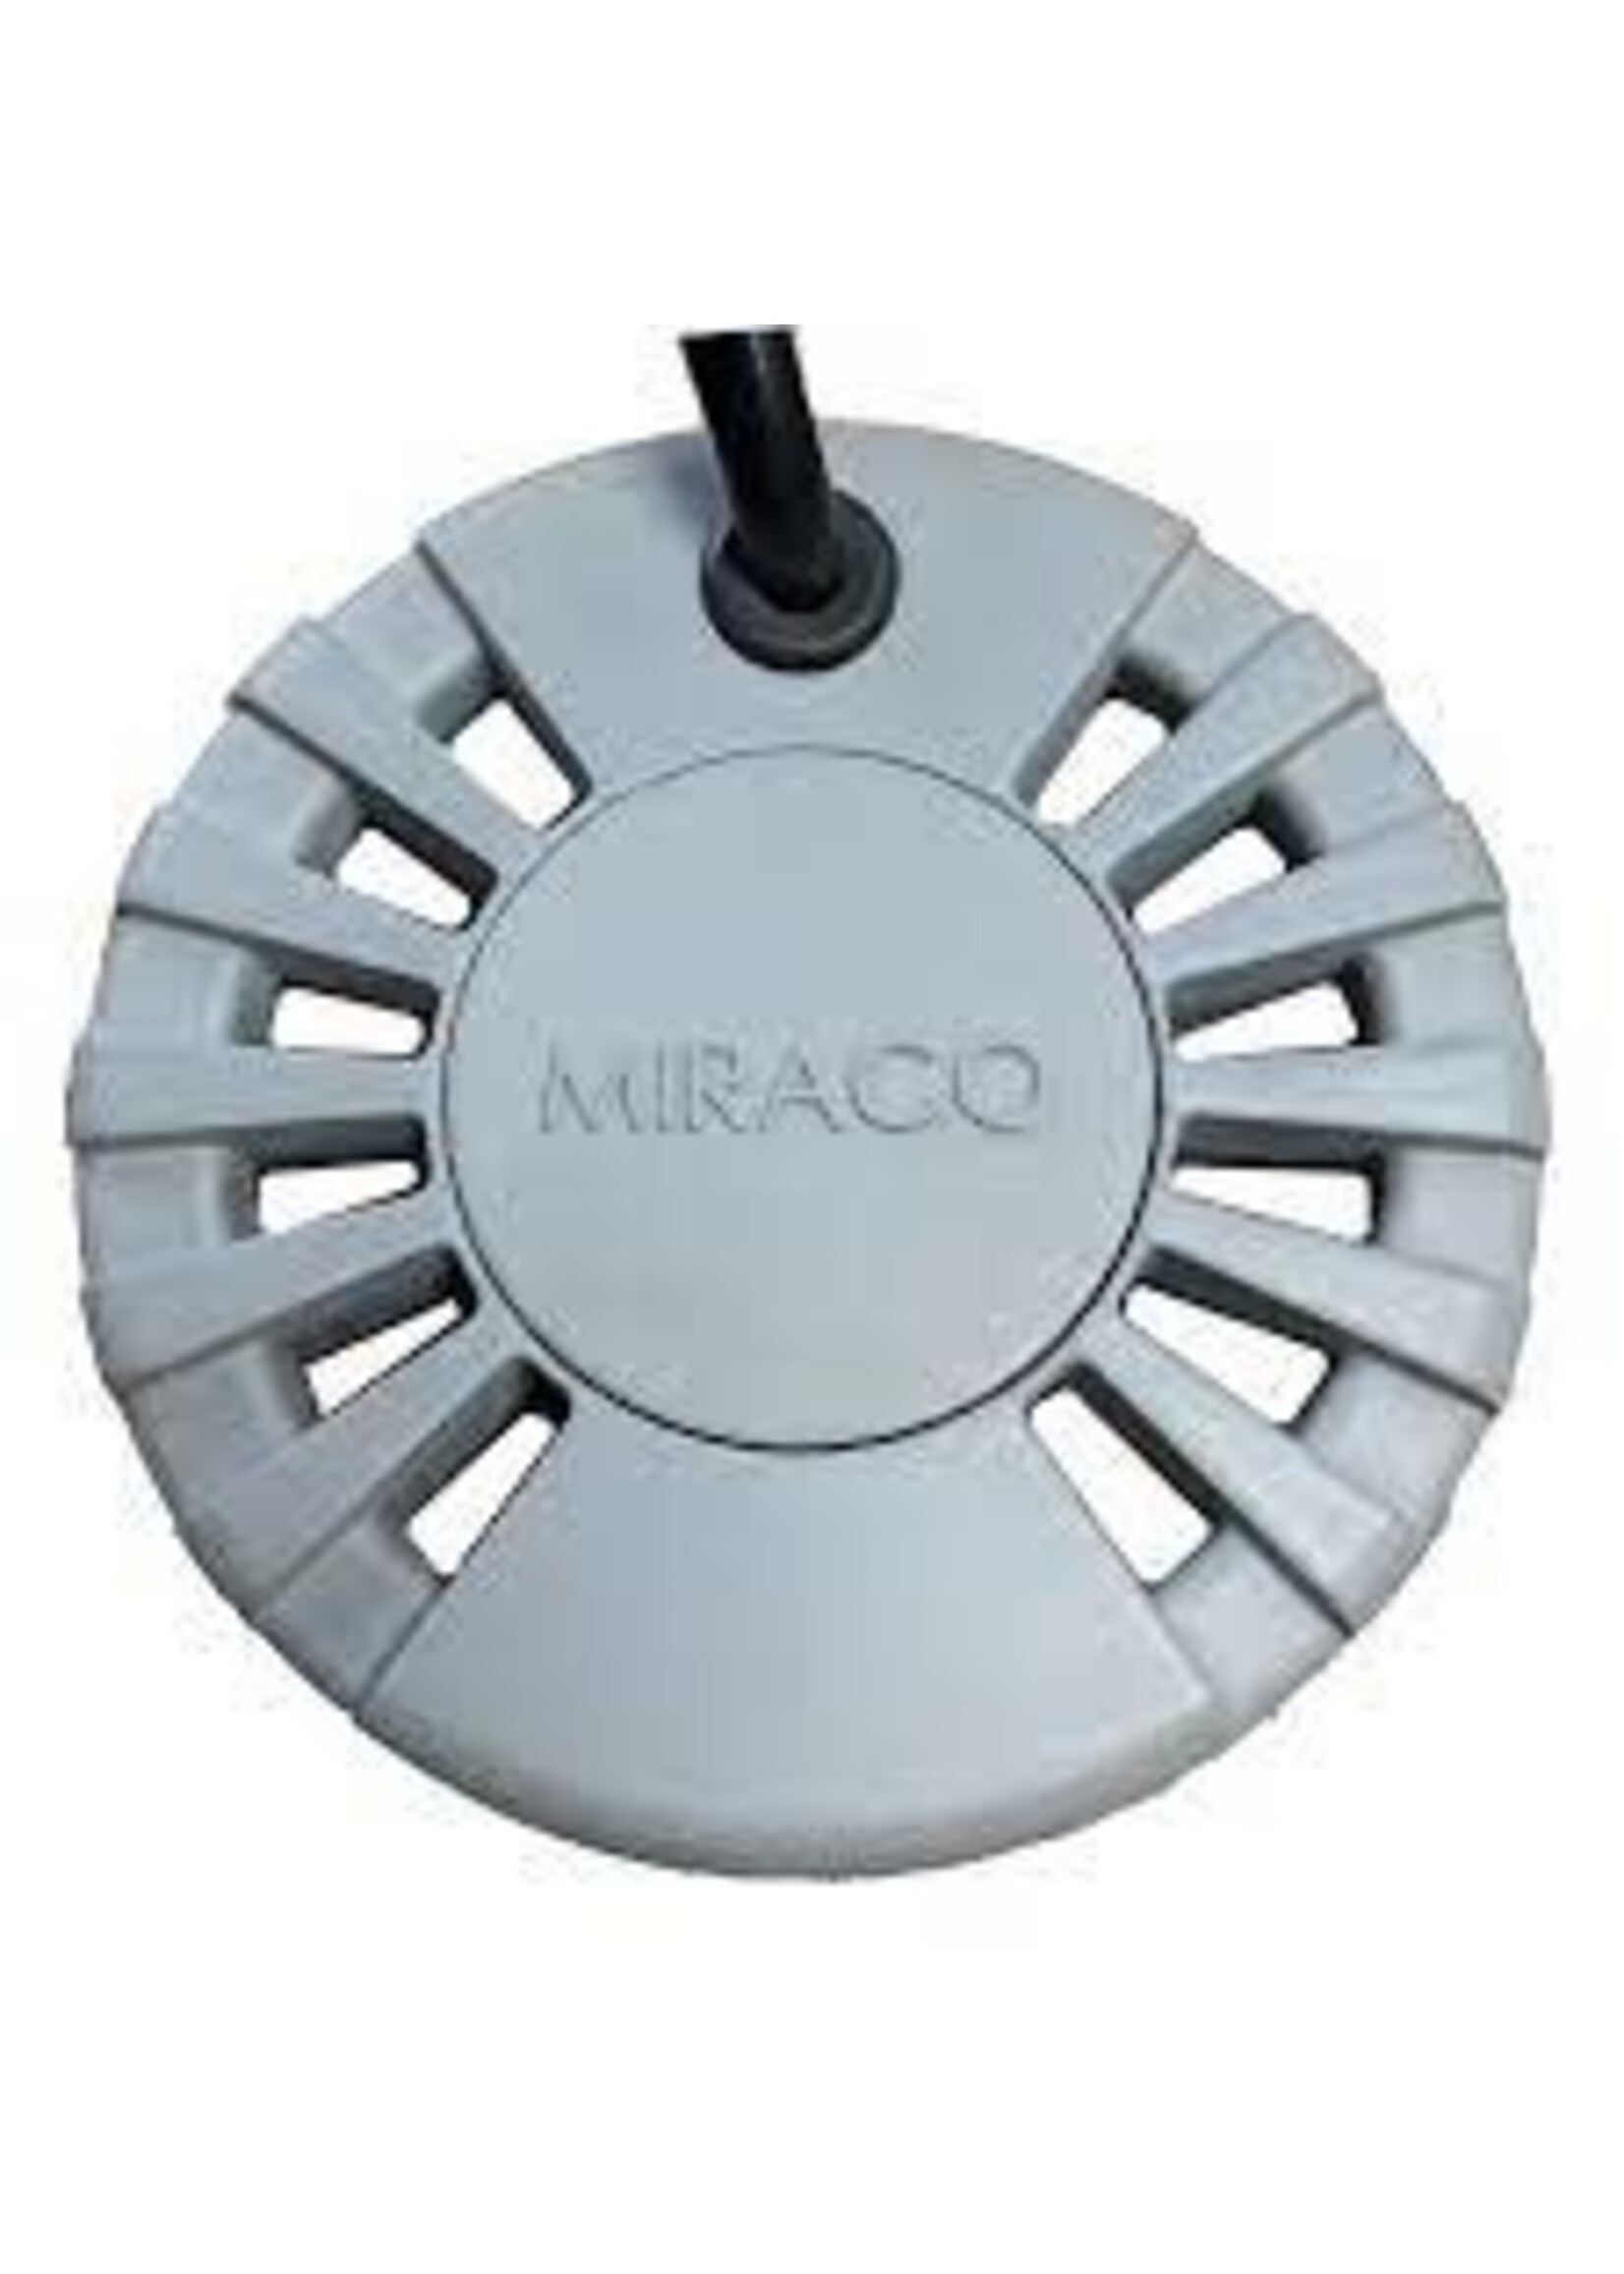 Miraco Miraco Heater - 500W 110V Immersion Heater (Heater only)